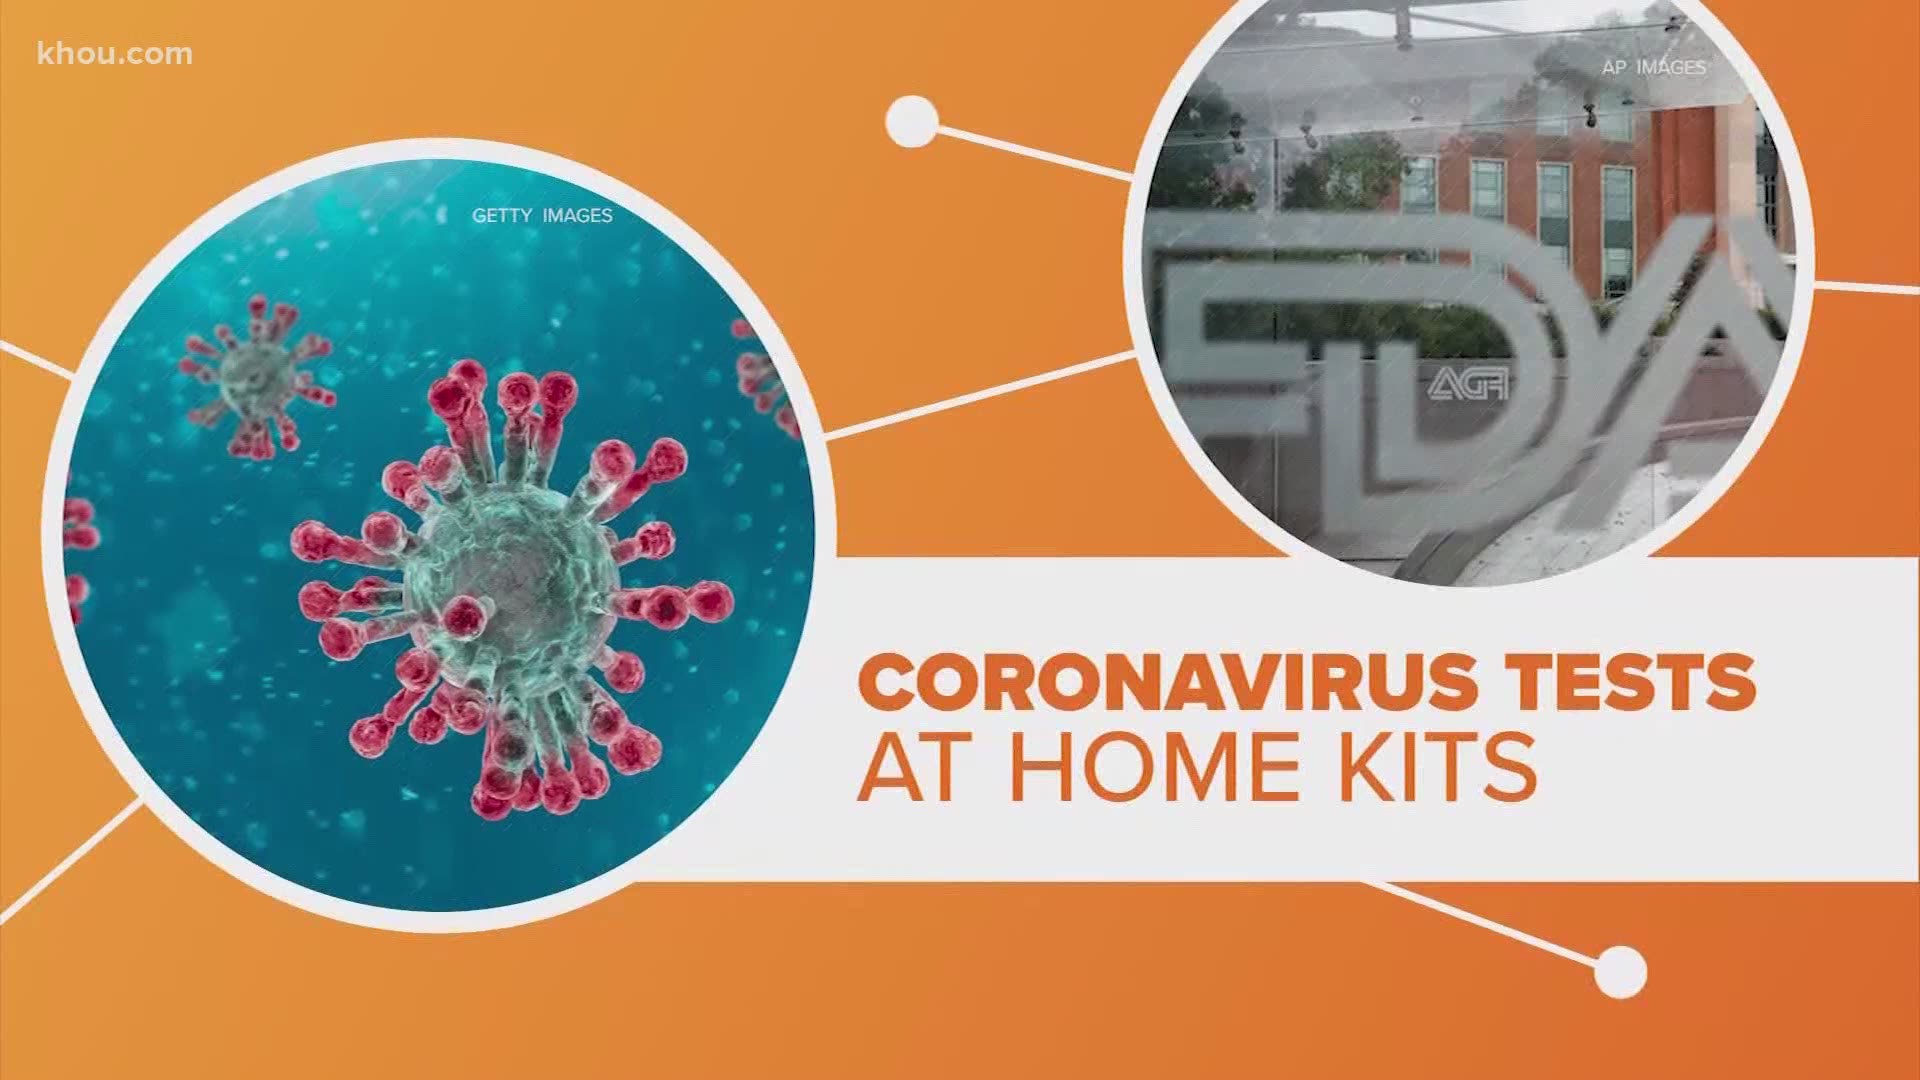 The FDA is opening the door to a possible game changer when it comes to battling coronavirus at-home test kits. So how would they work? Let's connect the dots.